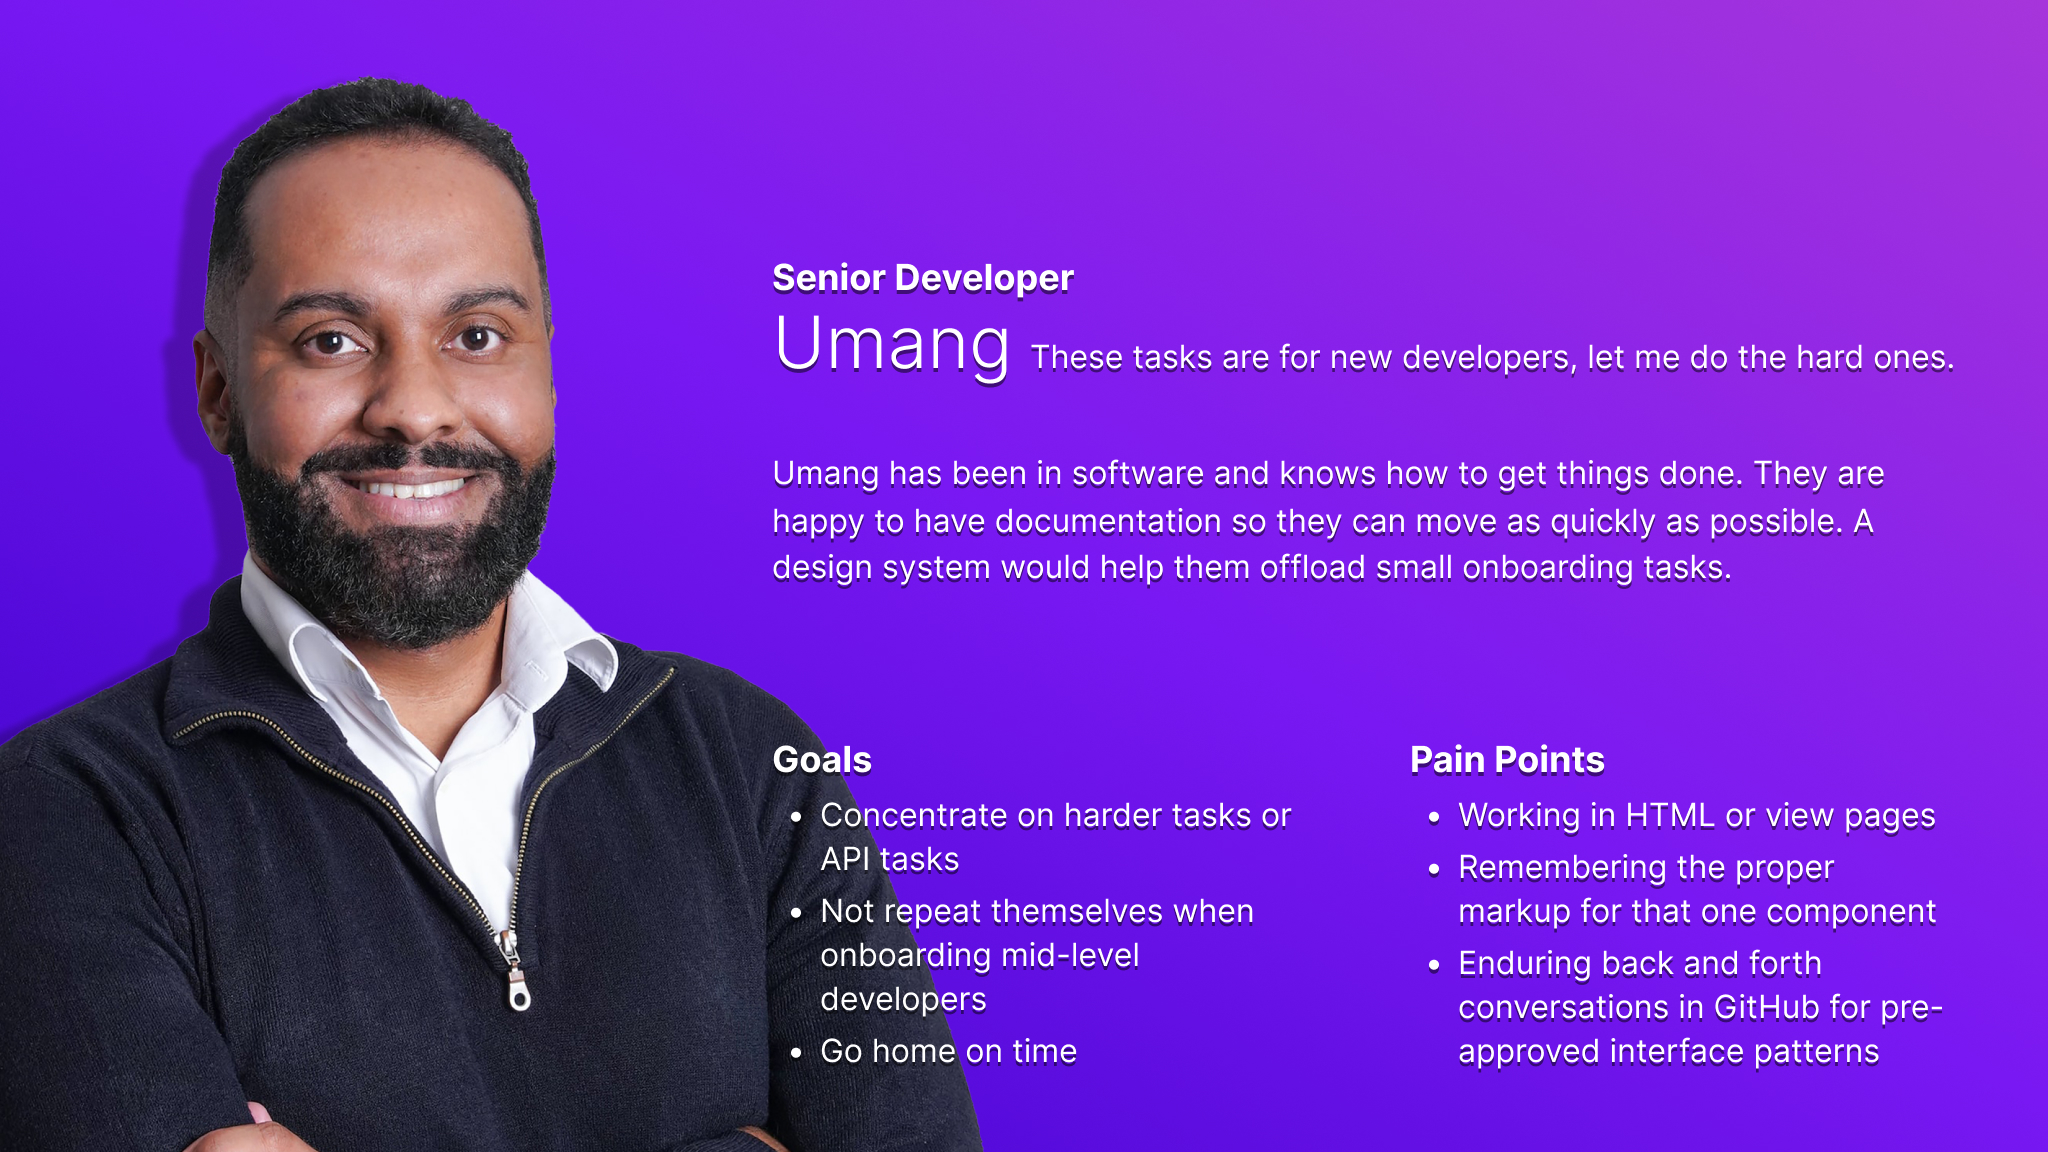 Persona card for Umang who represents developers who will use the design system in code and during user acceptance testing.